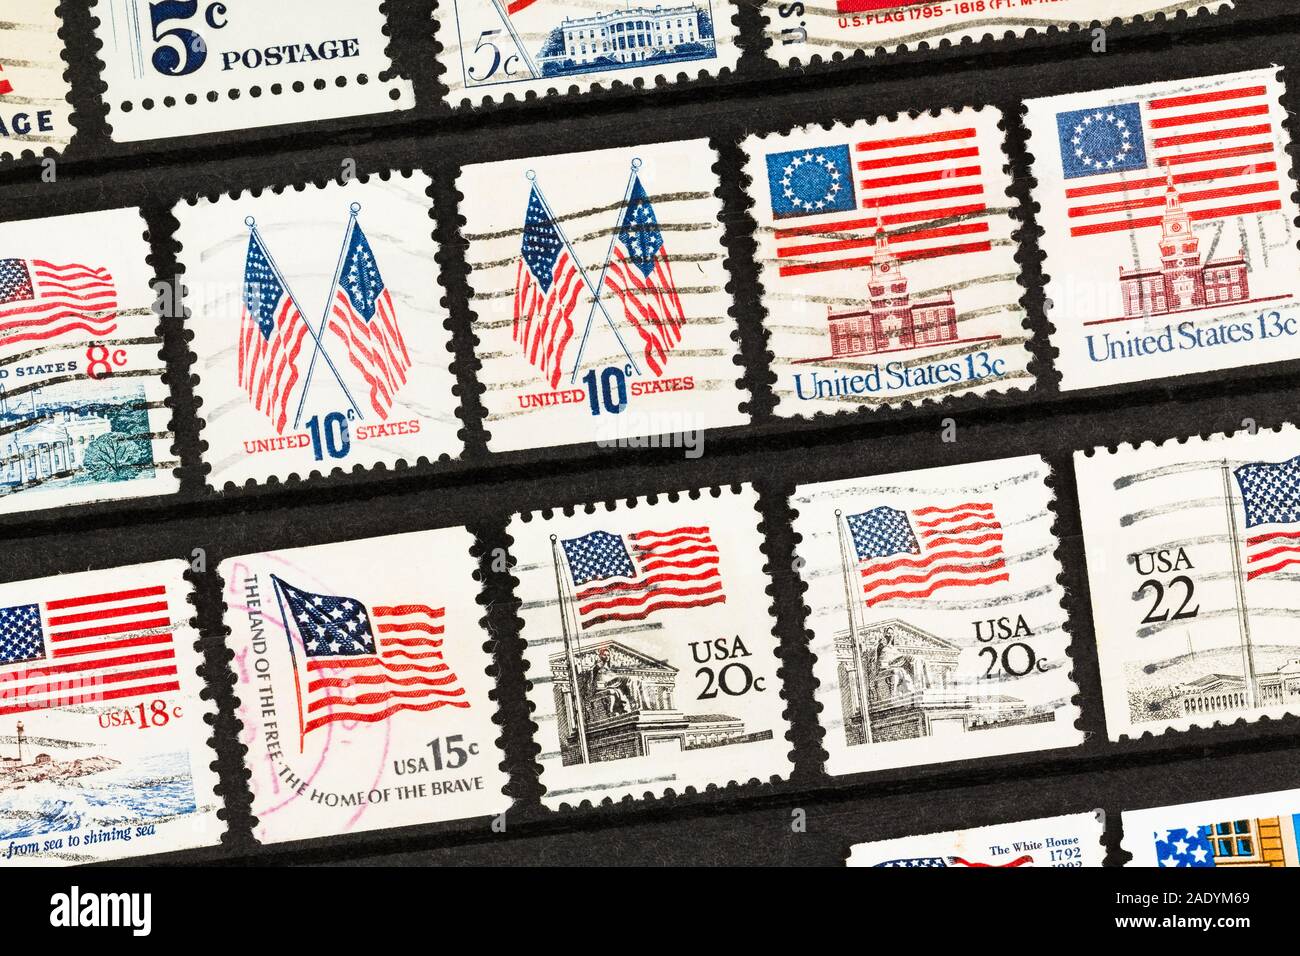 SEATTLE WASHINGTON - November 28, 2019:  Rows of old used United States postage stamps on an angle in stock book. Stock Photo